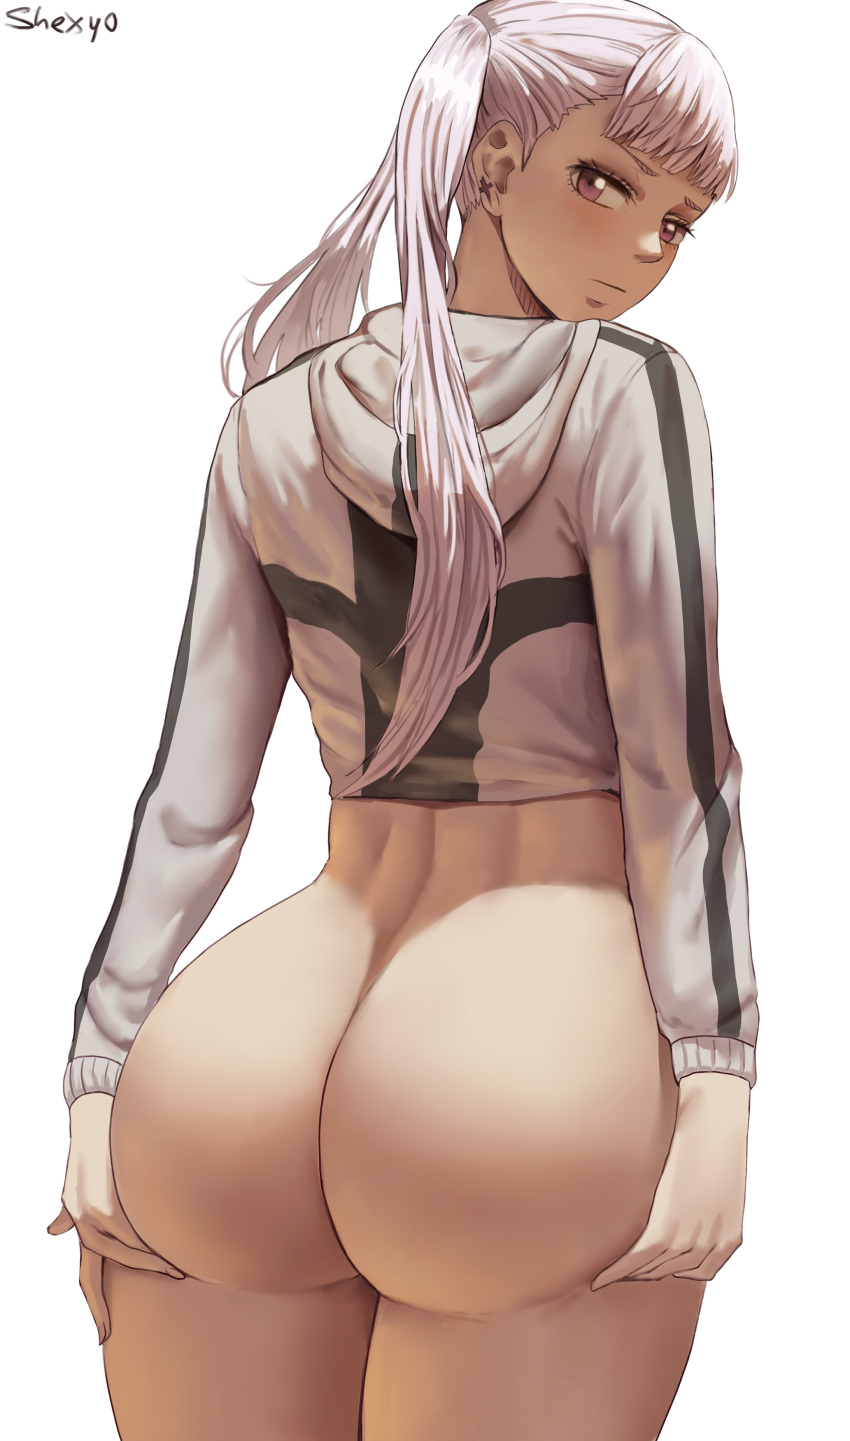 1girl 1girl ass black_clover clothing cropped_jacket earrings high_resolution hood huge_ass jacket jewelry long_hair looking_at_viewer looking_back no_pants no_underwear noelle_silva purple_eyes purple_hair shexyo tied_hair twin_tails very_high_resolution